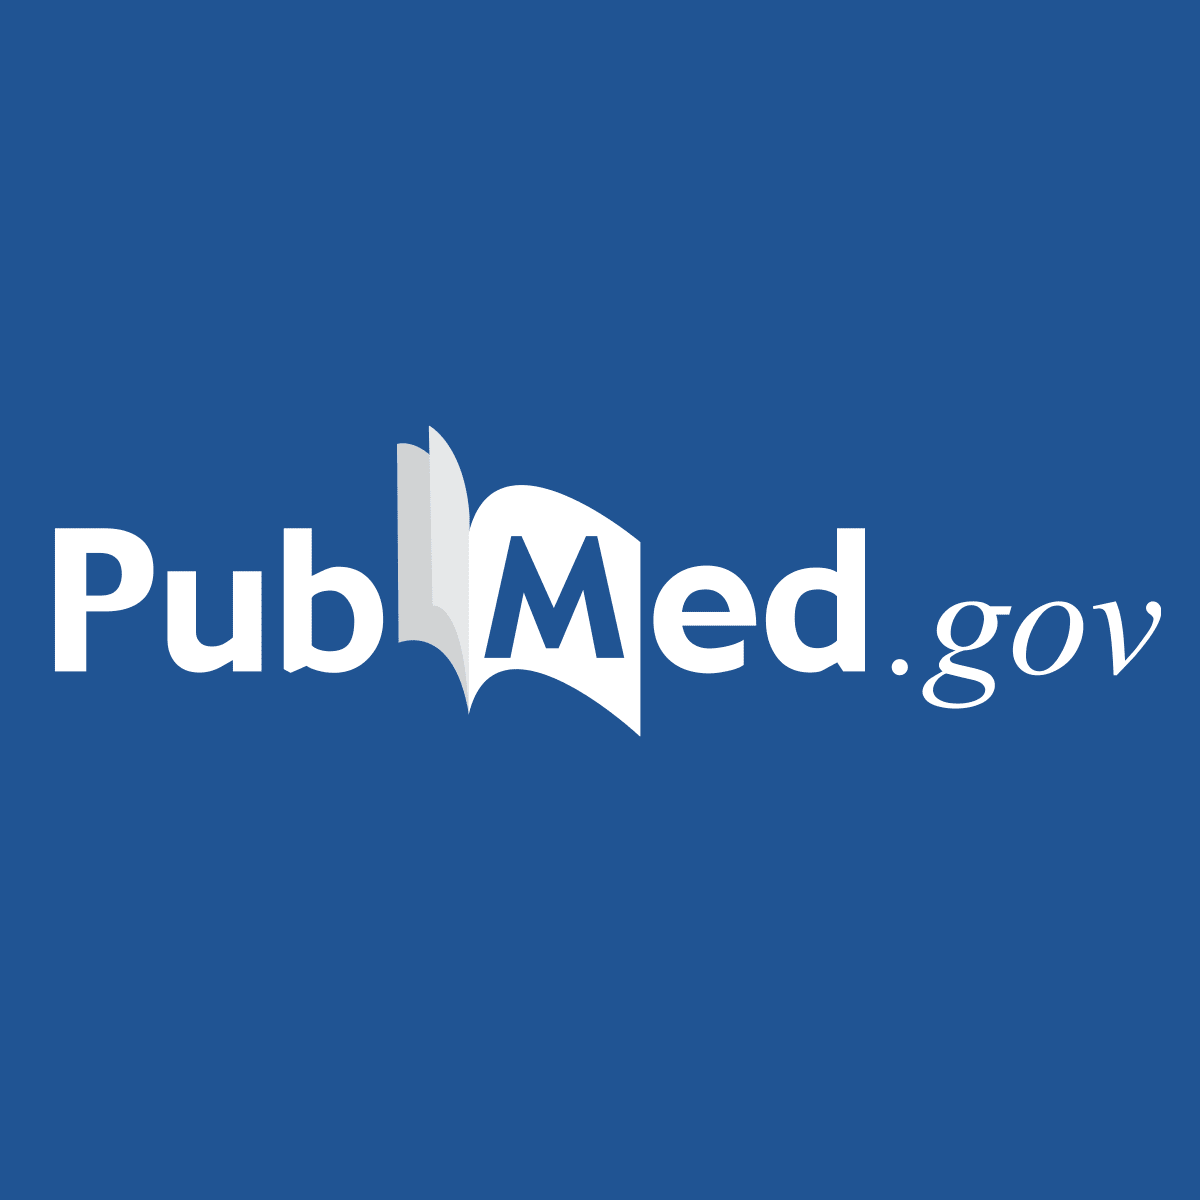 Glutamine deficiency as a cause of human immunodeficiency virus wasting - PubMed